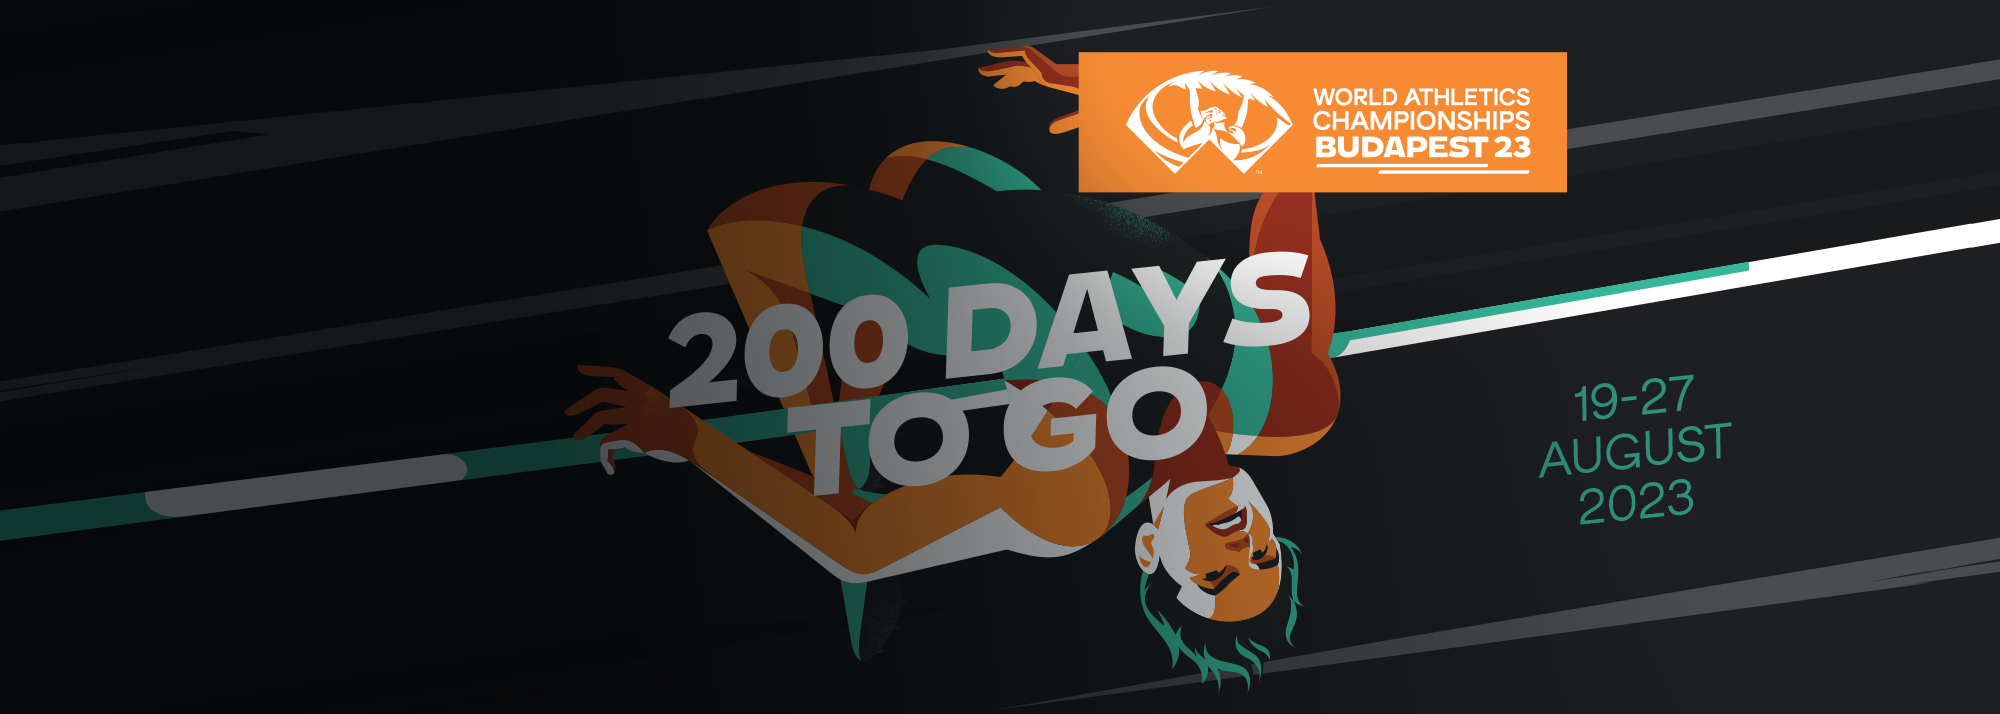 Budapest's hosting of the World Athletics Championships is just 200 days away ©Budapest 2023